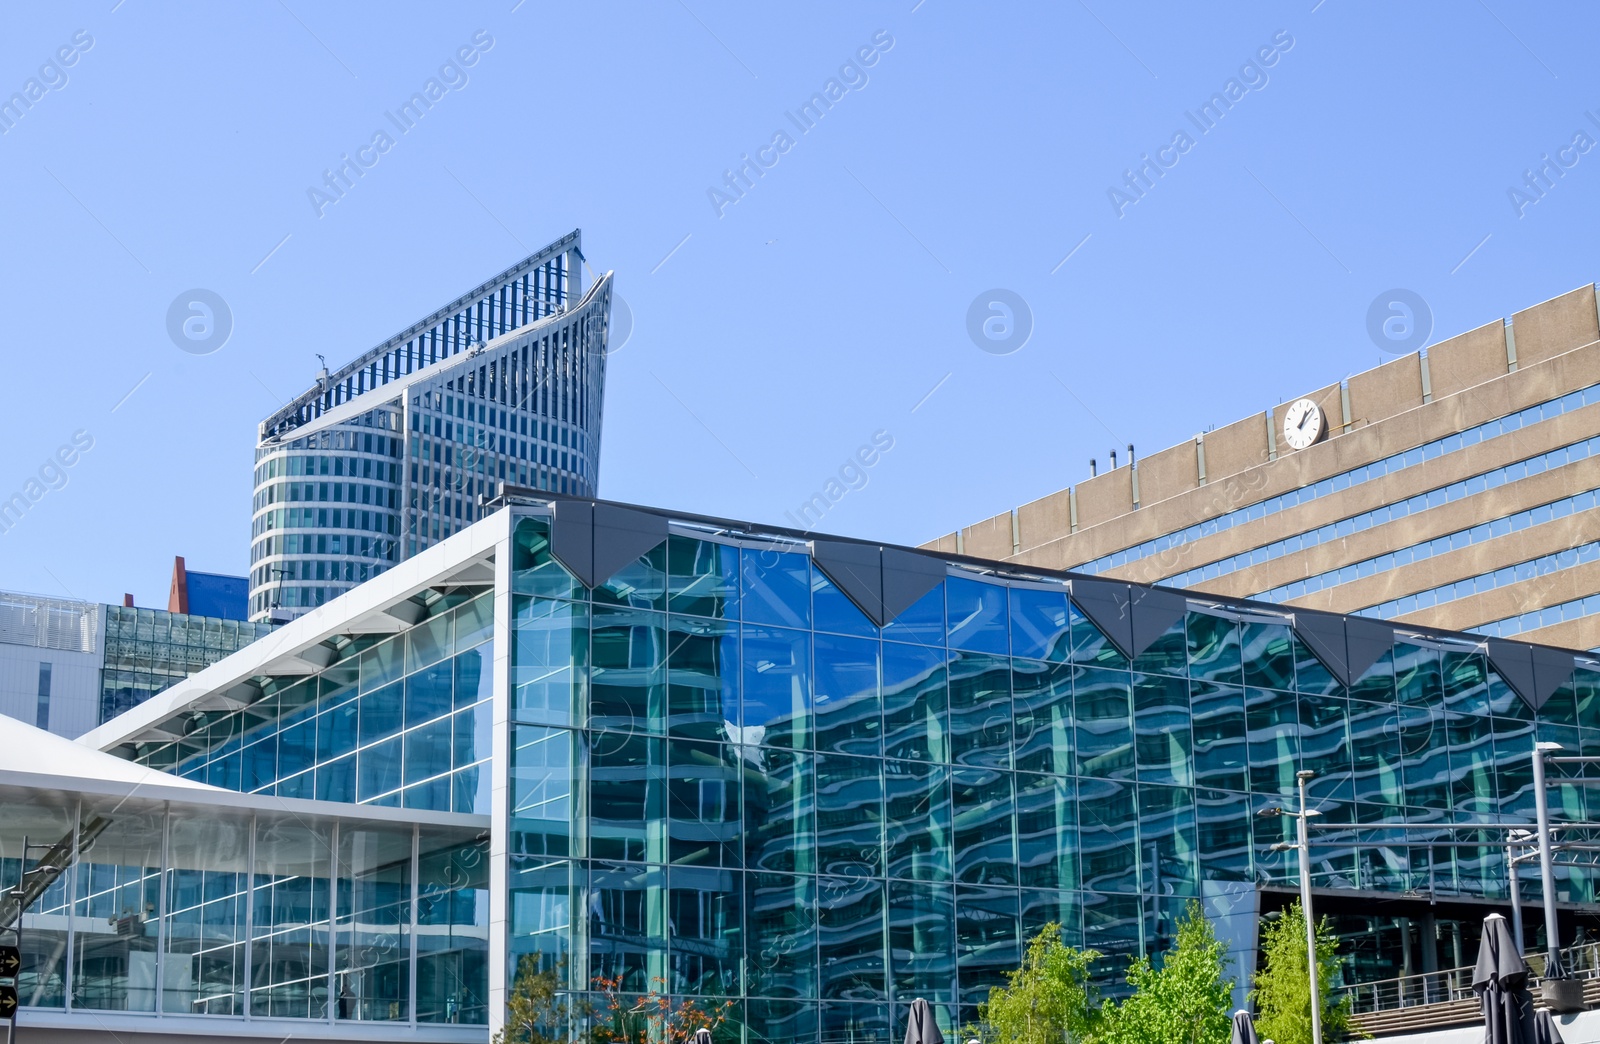 Photo of Exterior of beautiful modern buildings against blue sky